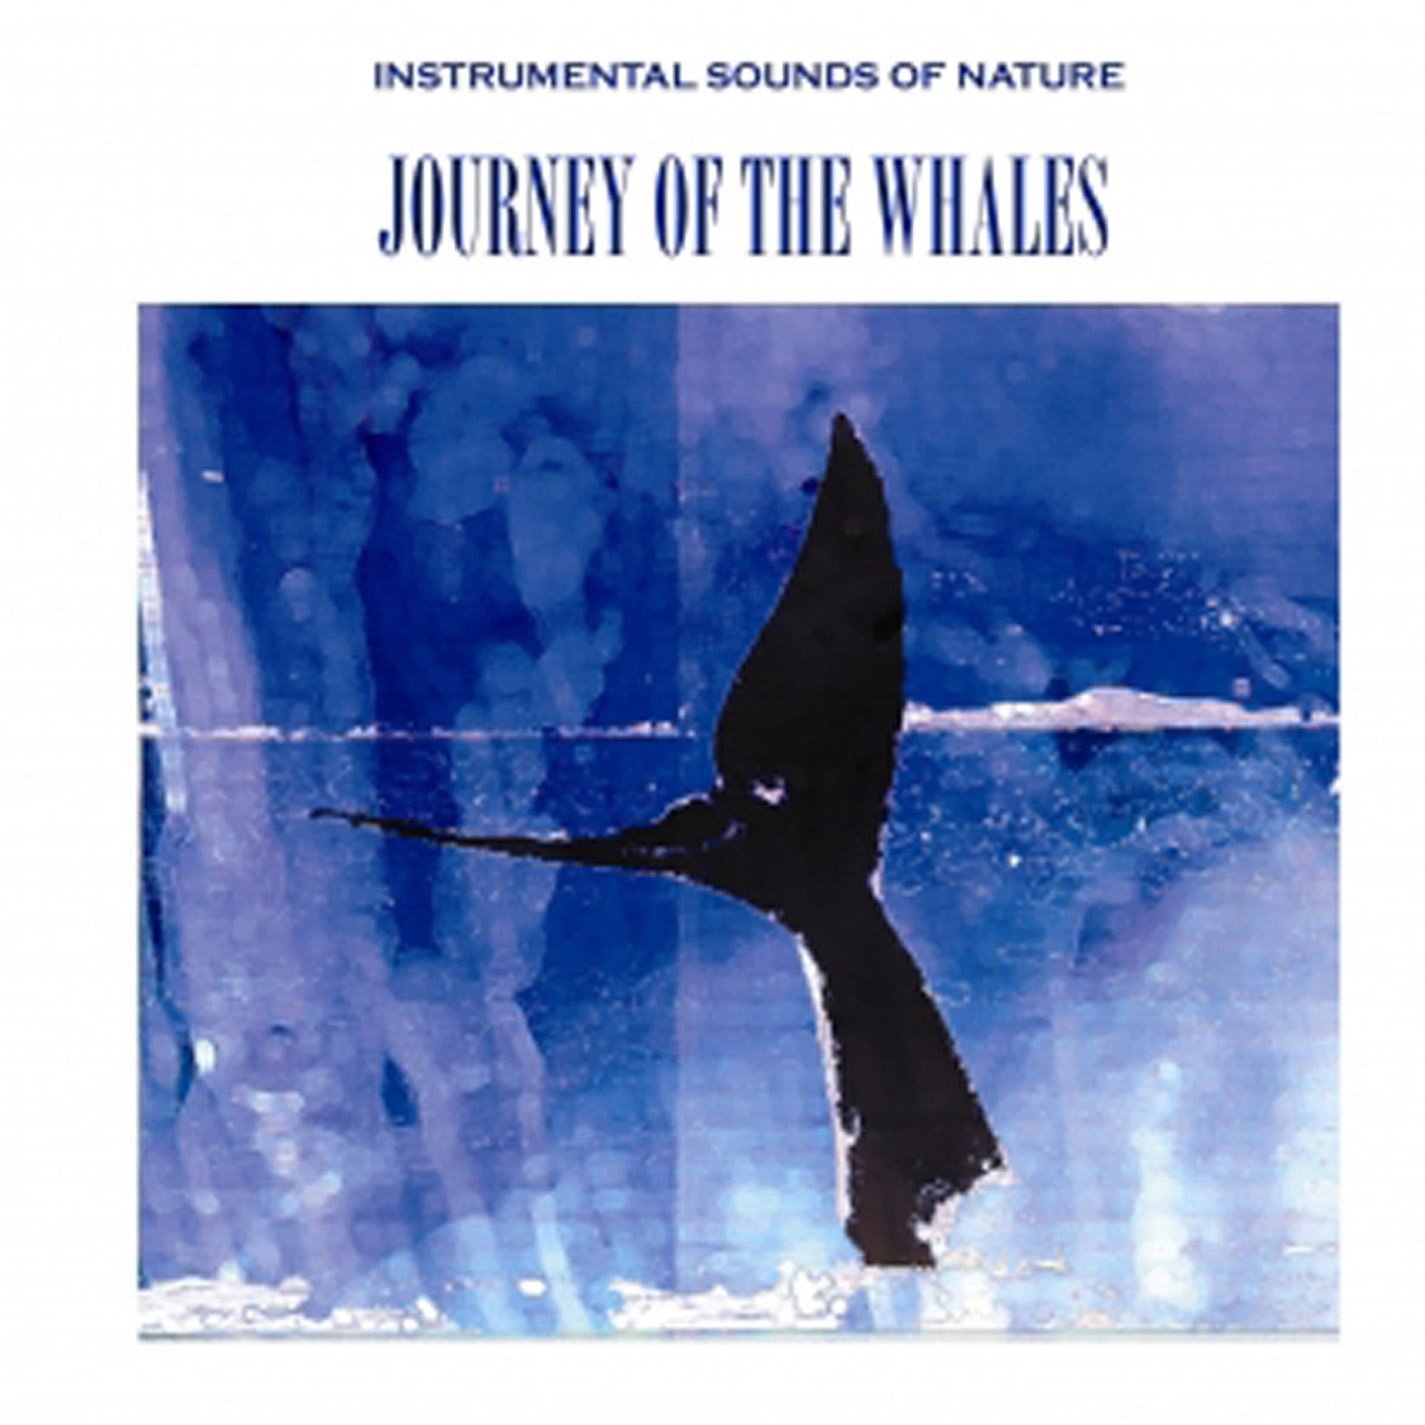 CD Journey of the whales - Instrumental sounds of nature